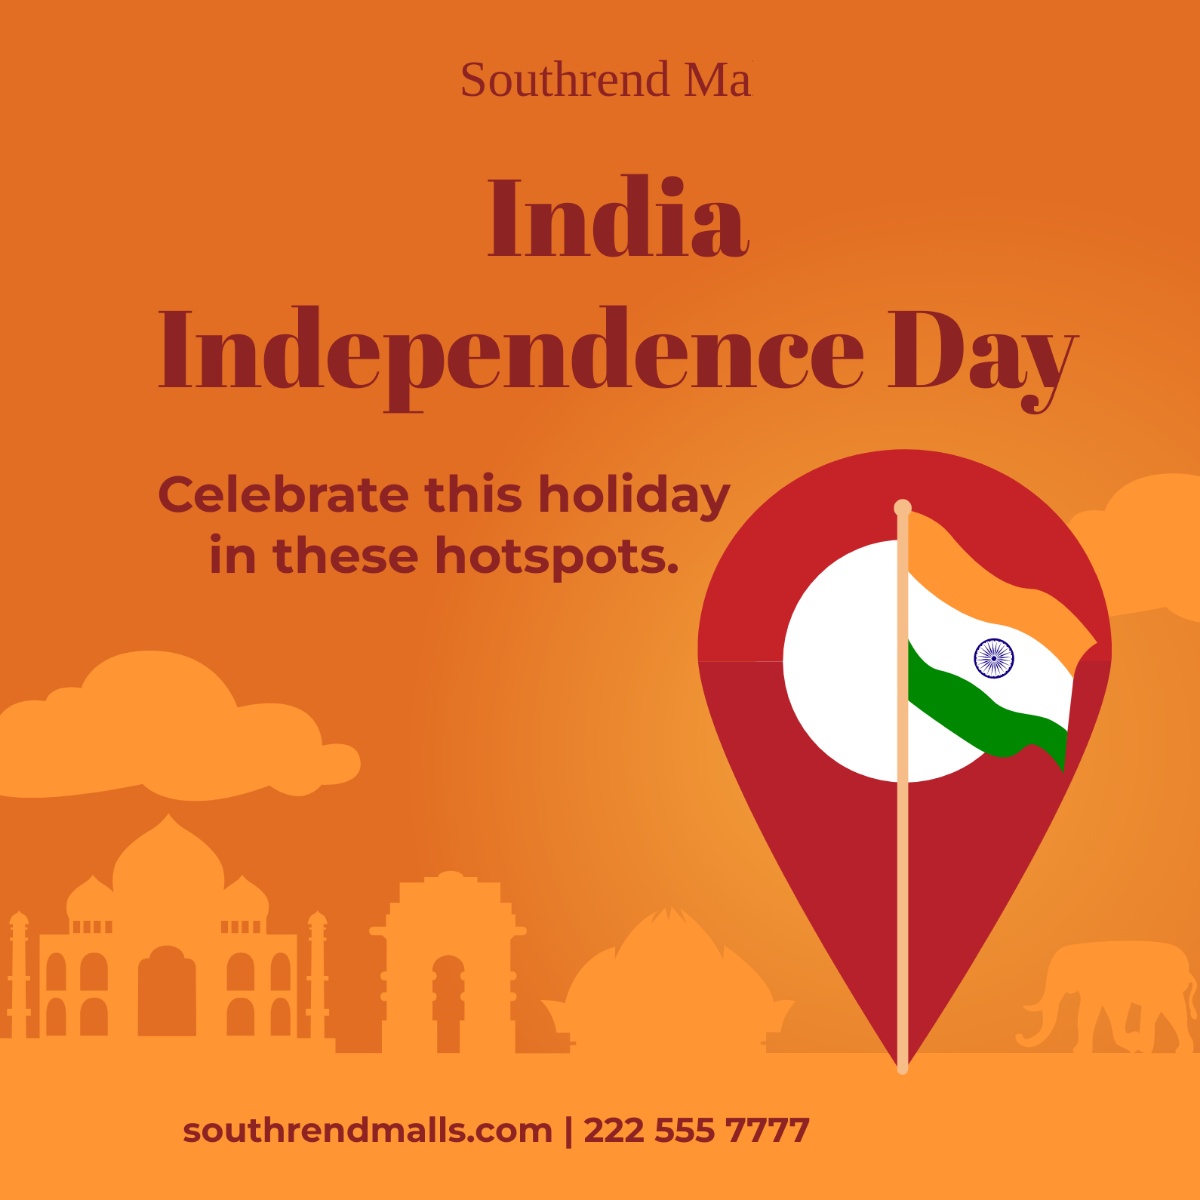 India Independence Day LinkedIn Post